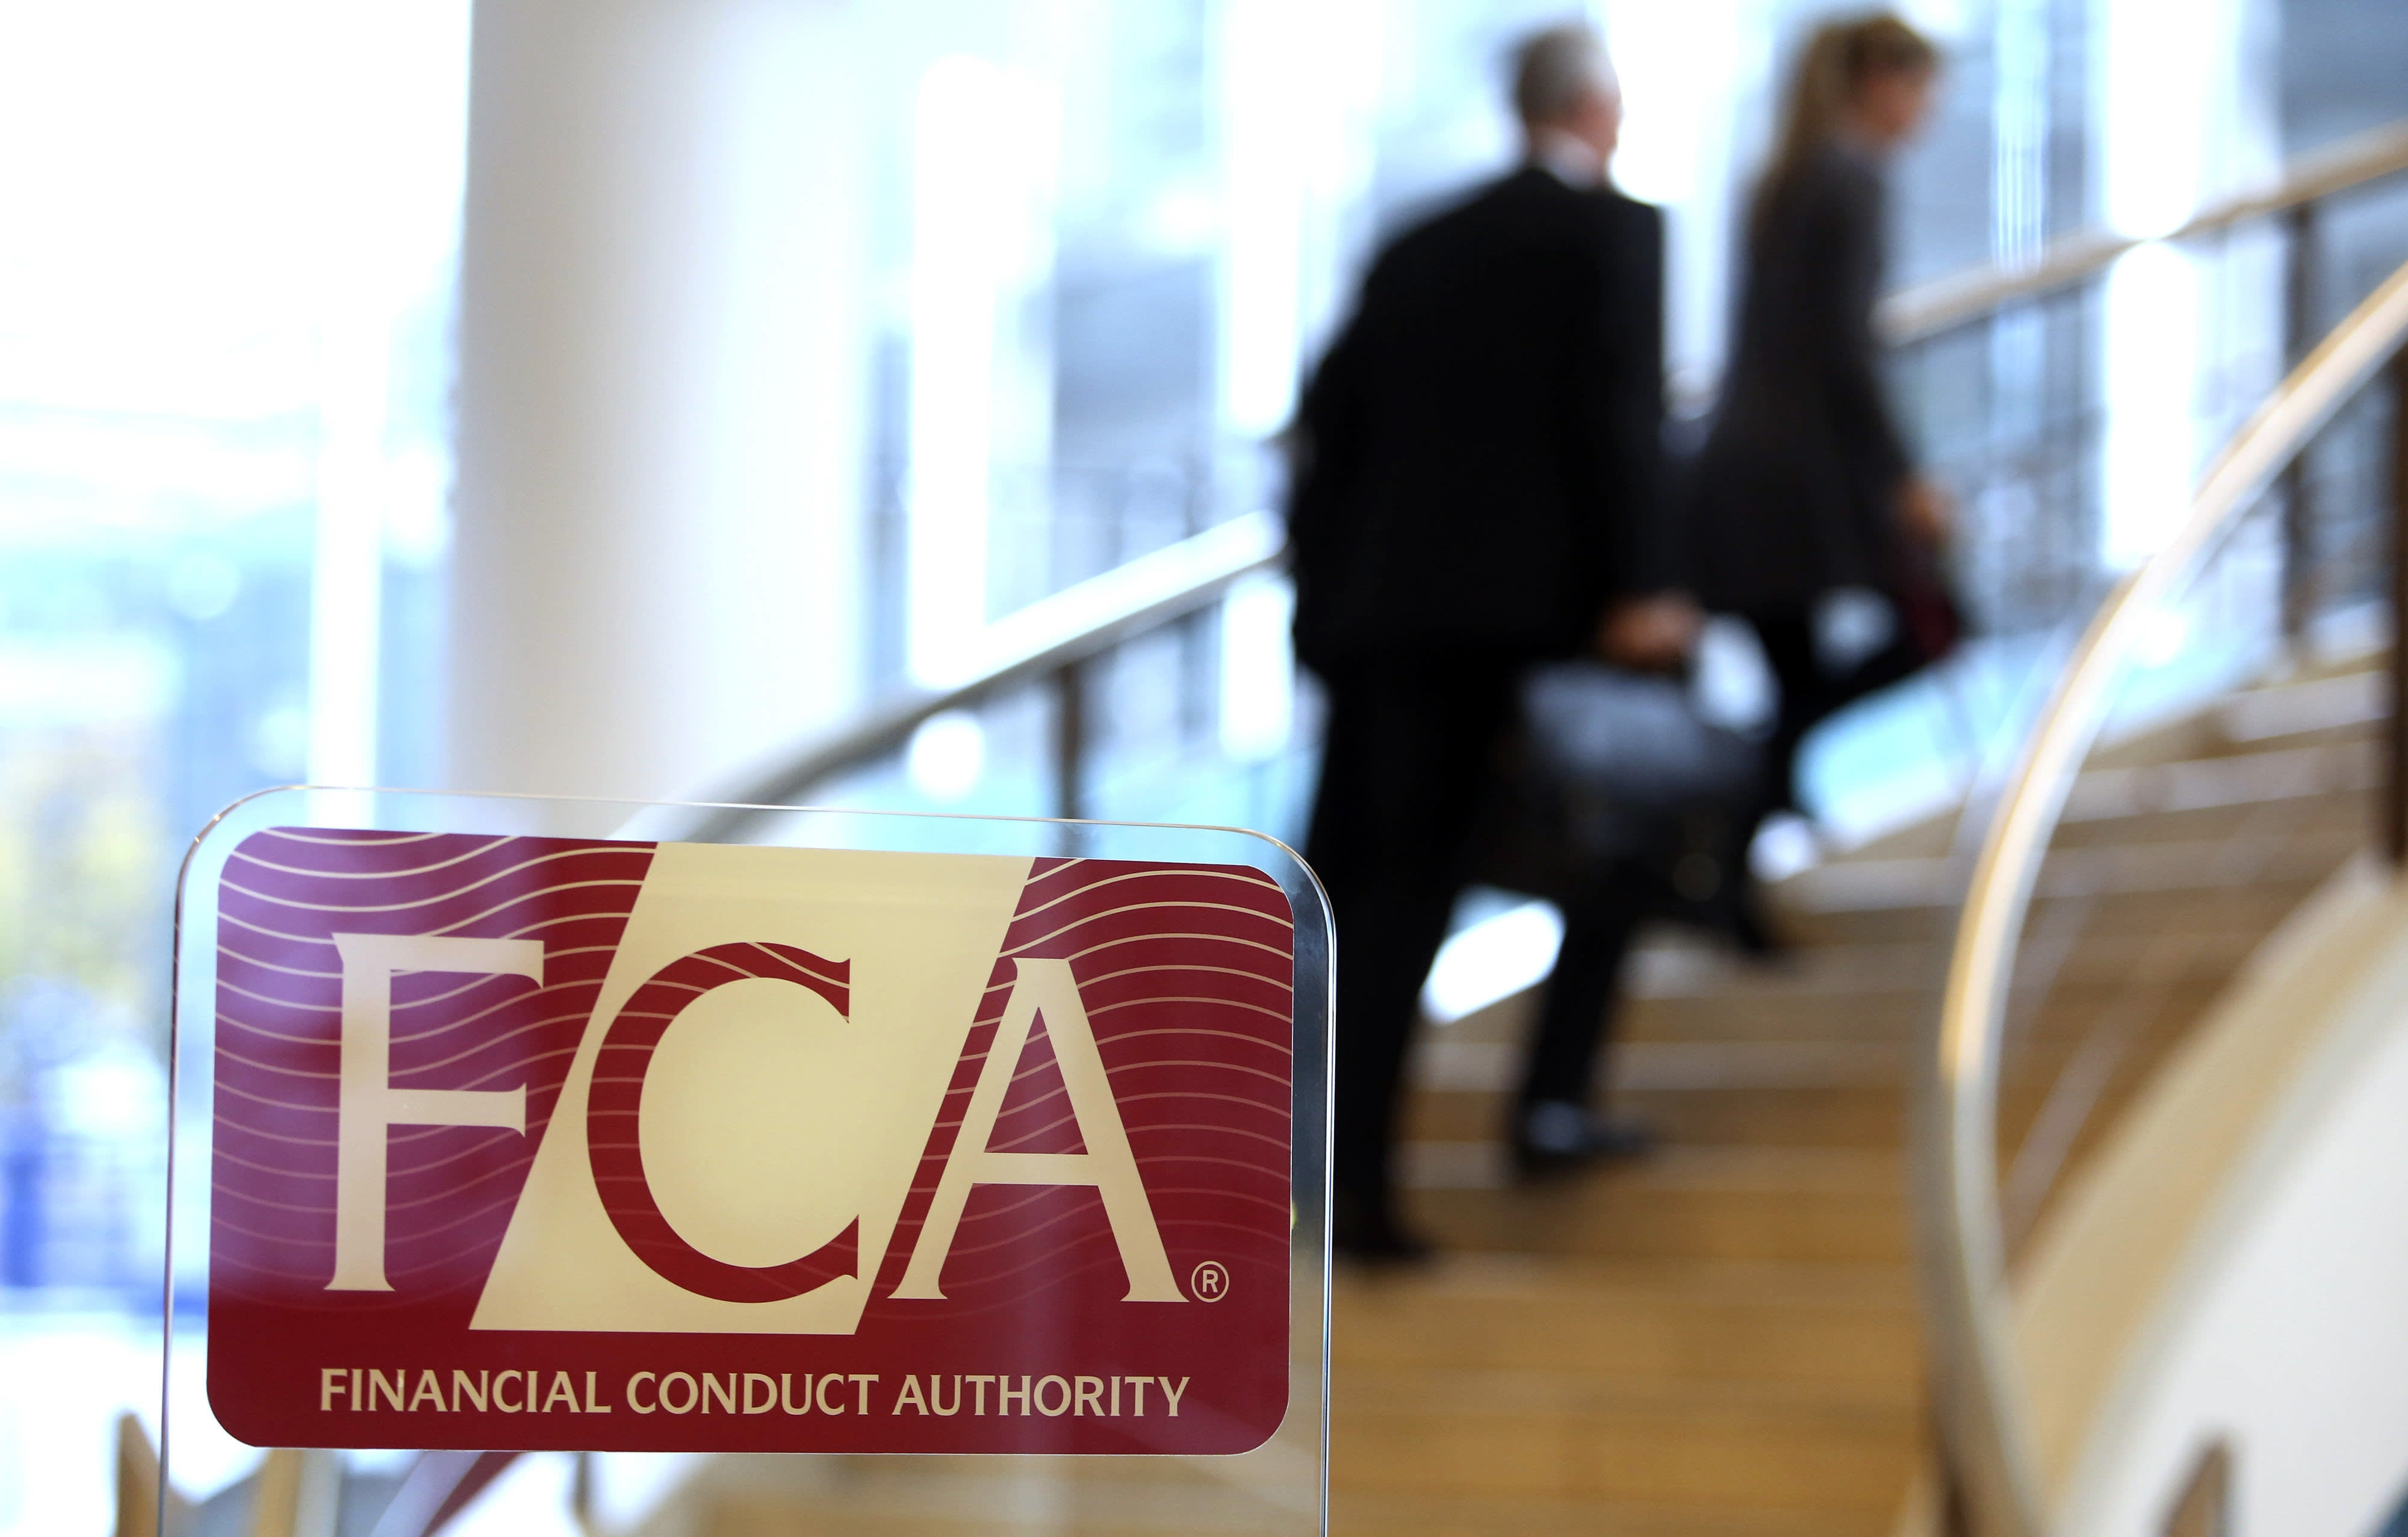 Firm to return £11.4m to duped investors after FCA probe